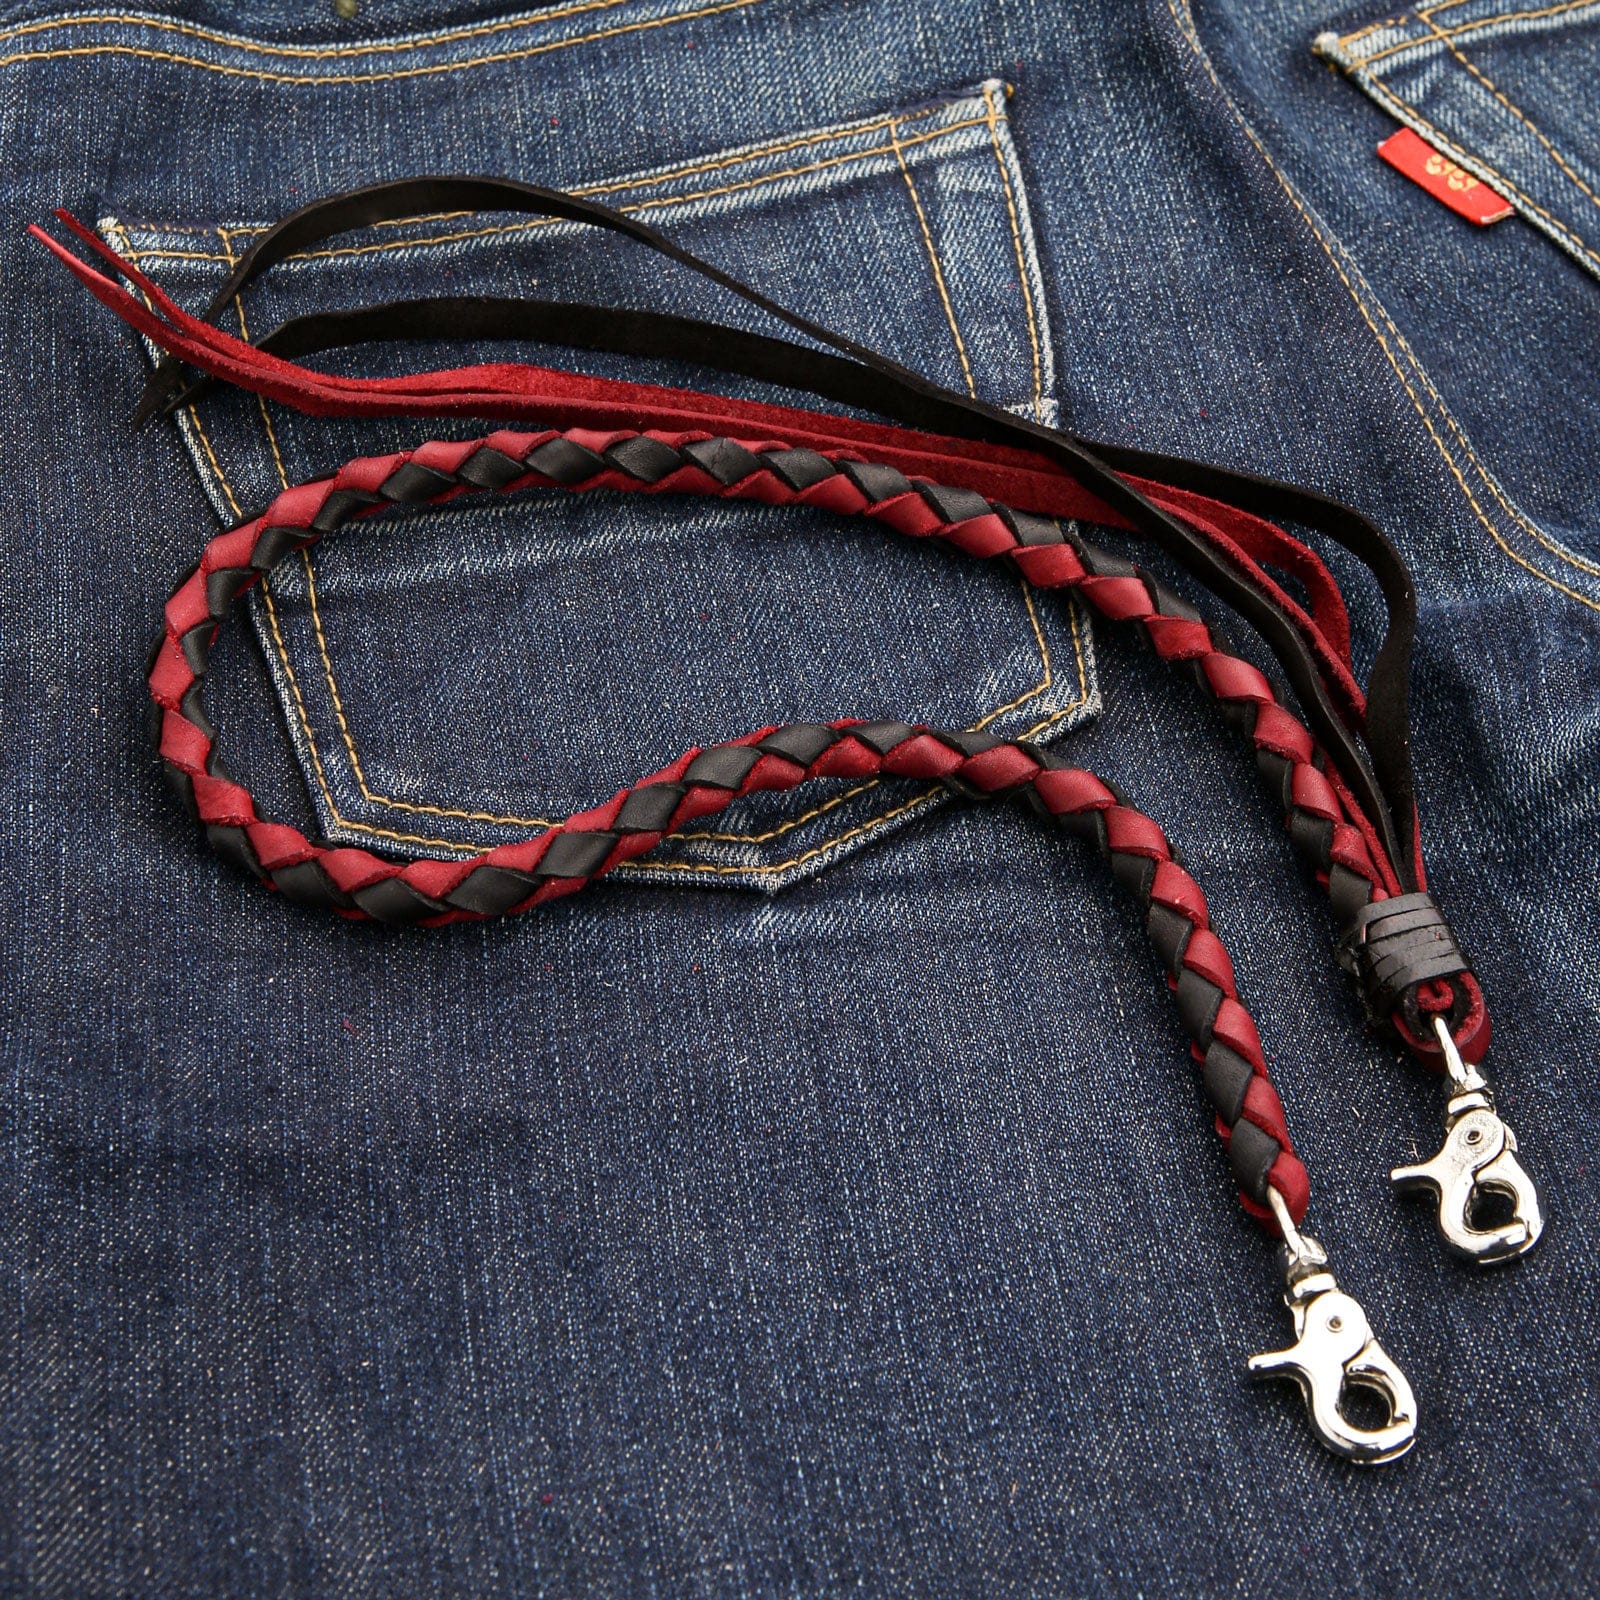 Leather Wallet Chain Braided Wallet Chain Leather Wallet Strap